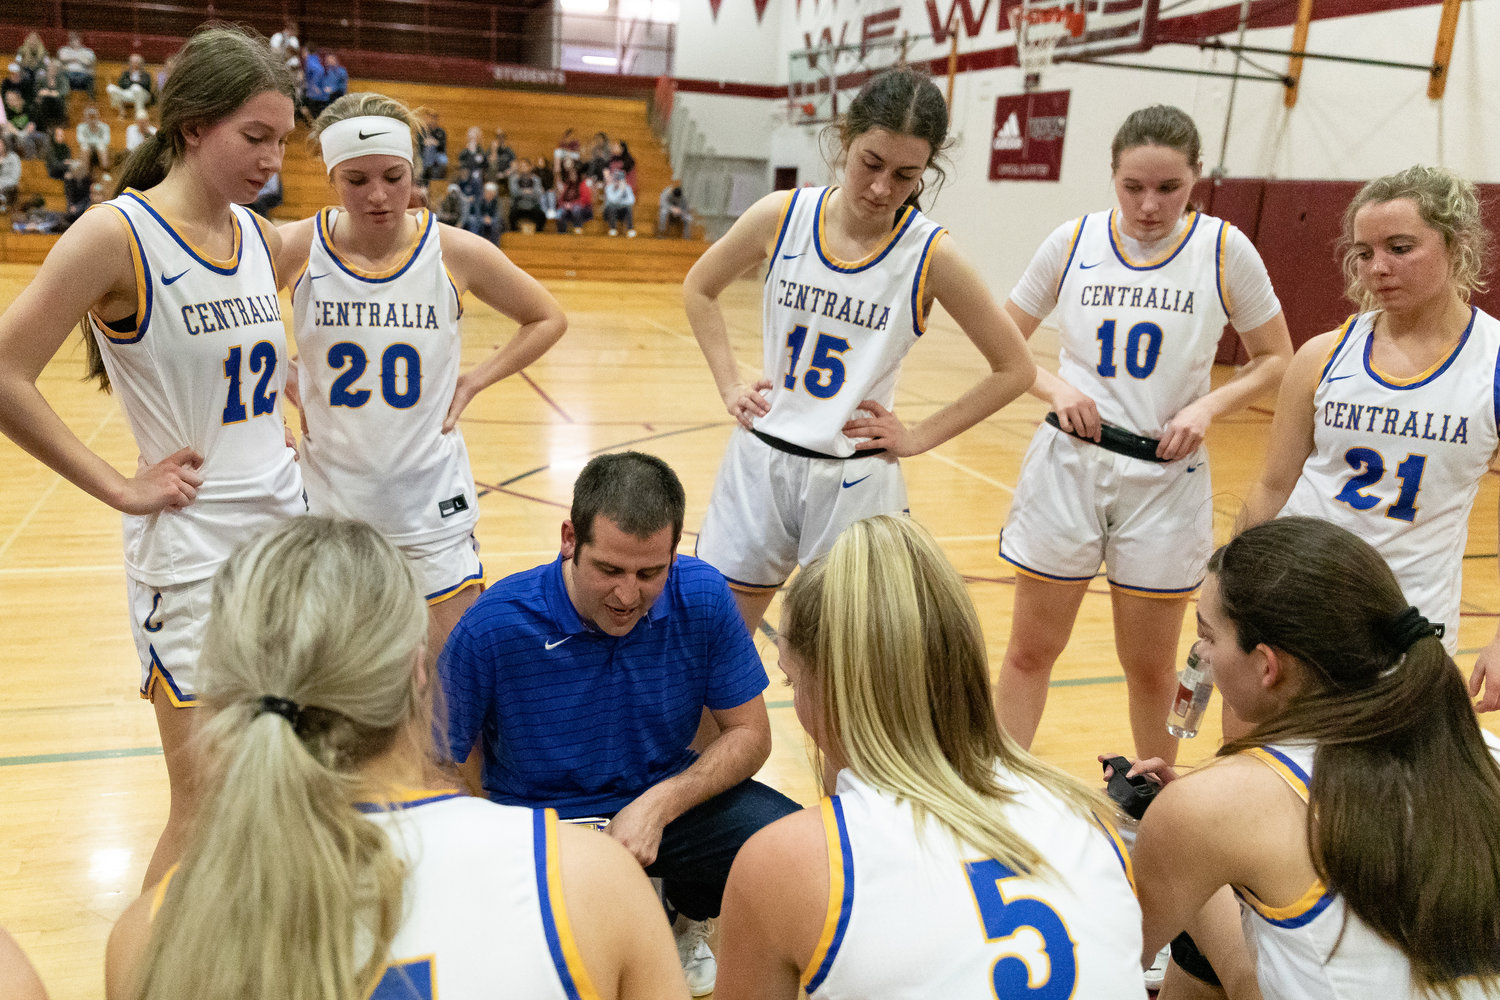 Adna coach Chris Bannish coaches up the white all-star team at the SWW Senior All-Star Game March 26 at W.F. West.